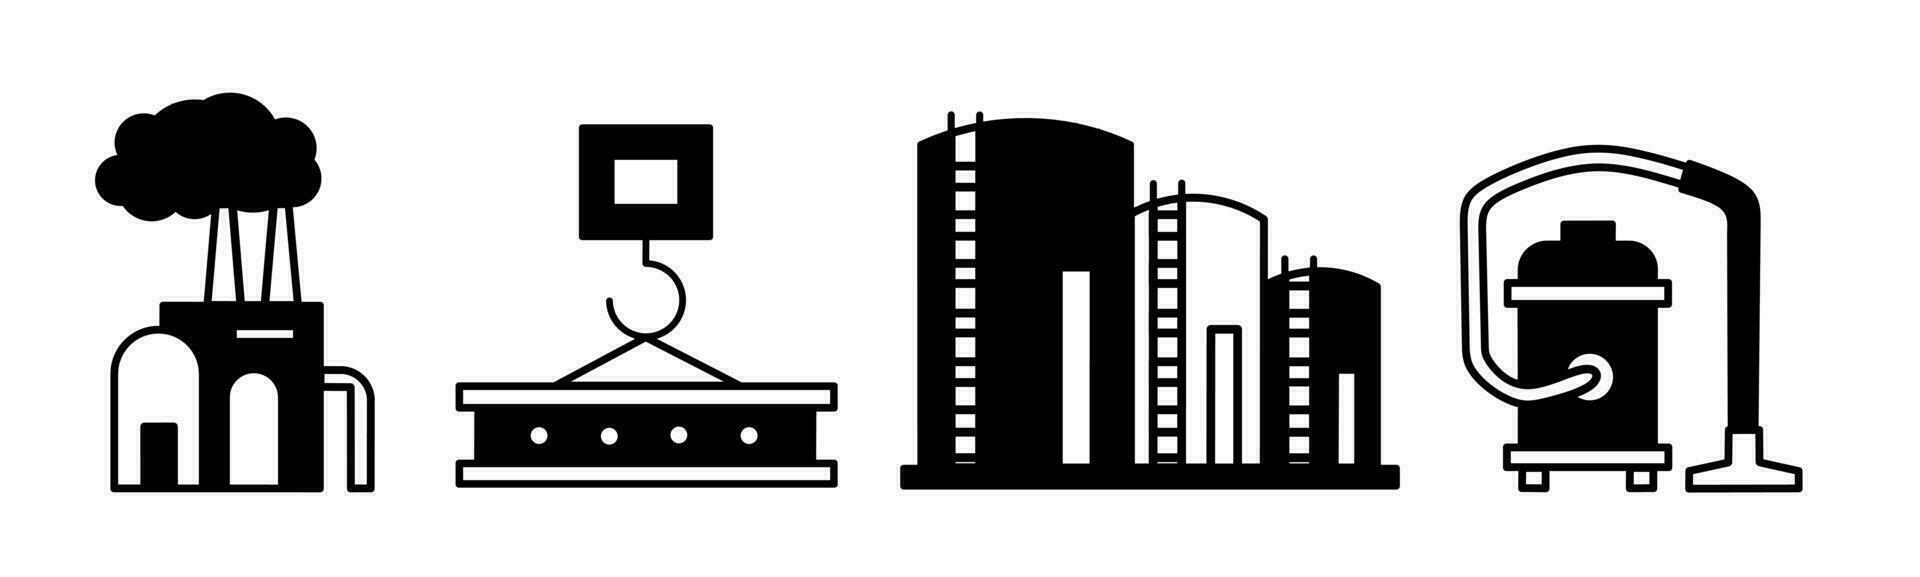 Construction, industrial icon vector black and white Illustration design for business. Stock vector.